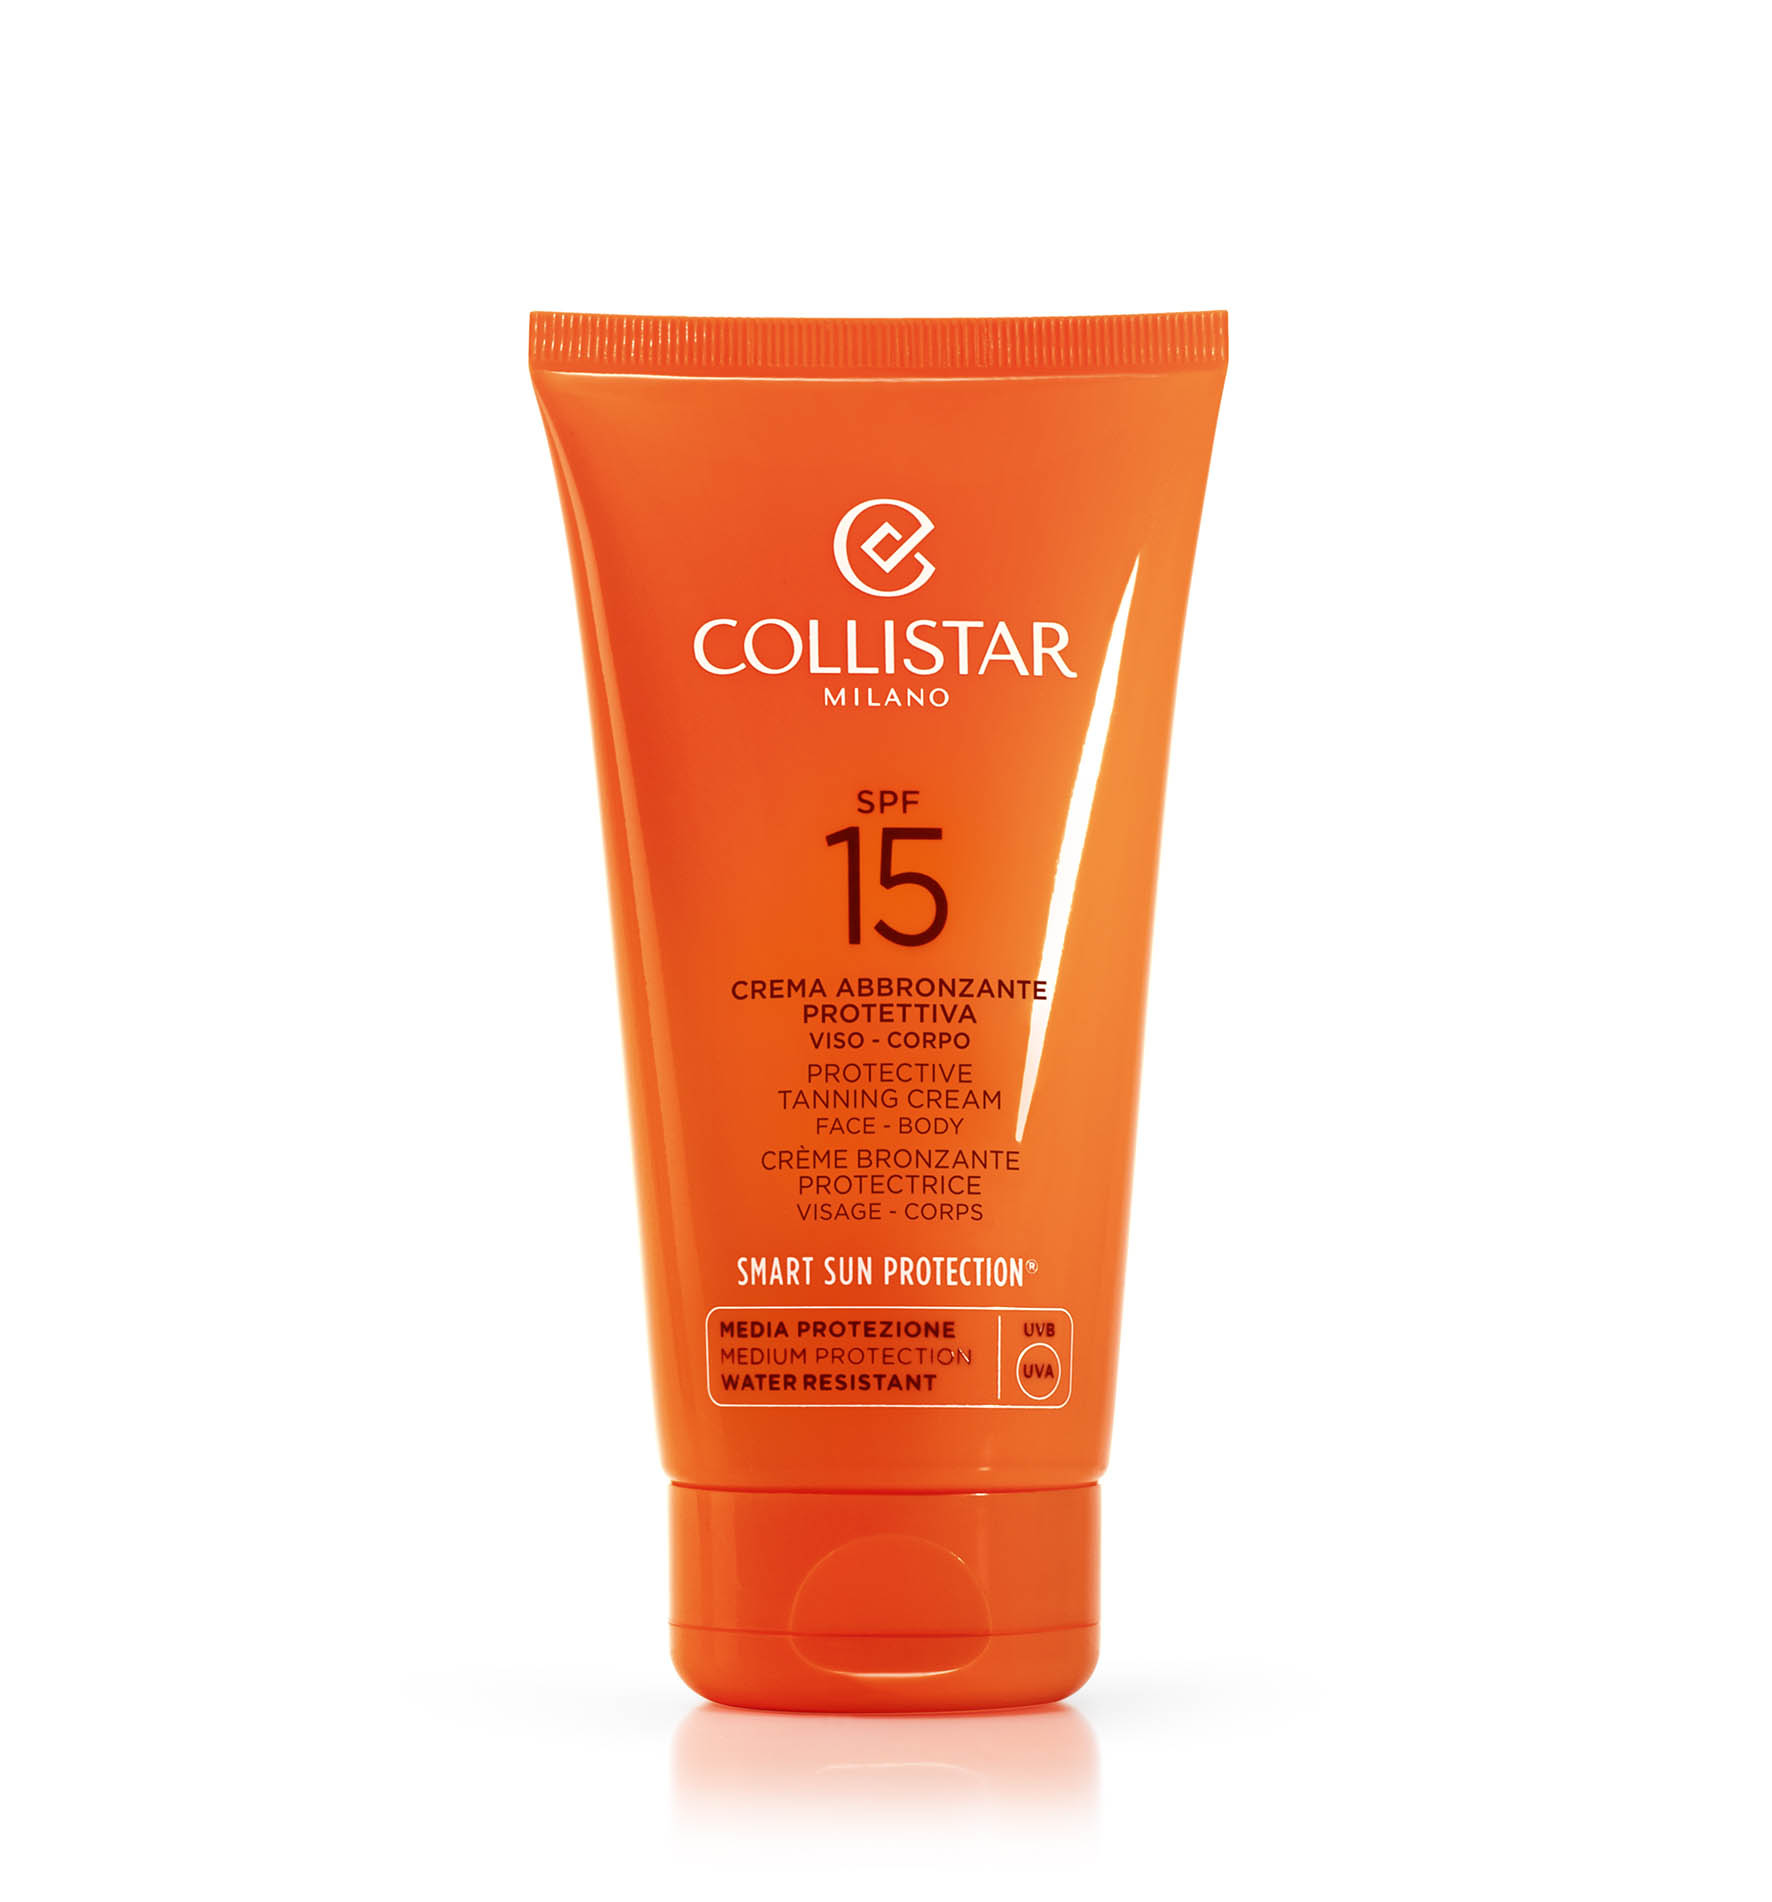 PROTECTIVE TANNING CREAM SPF 15 - Moderate Protection SPF 15-20 | Collistar - Shop Online Ufficiale